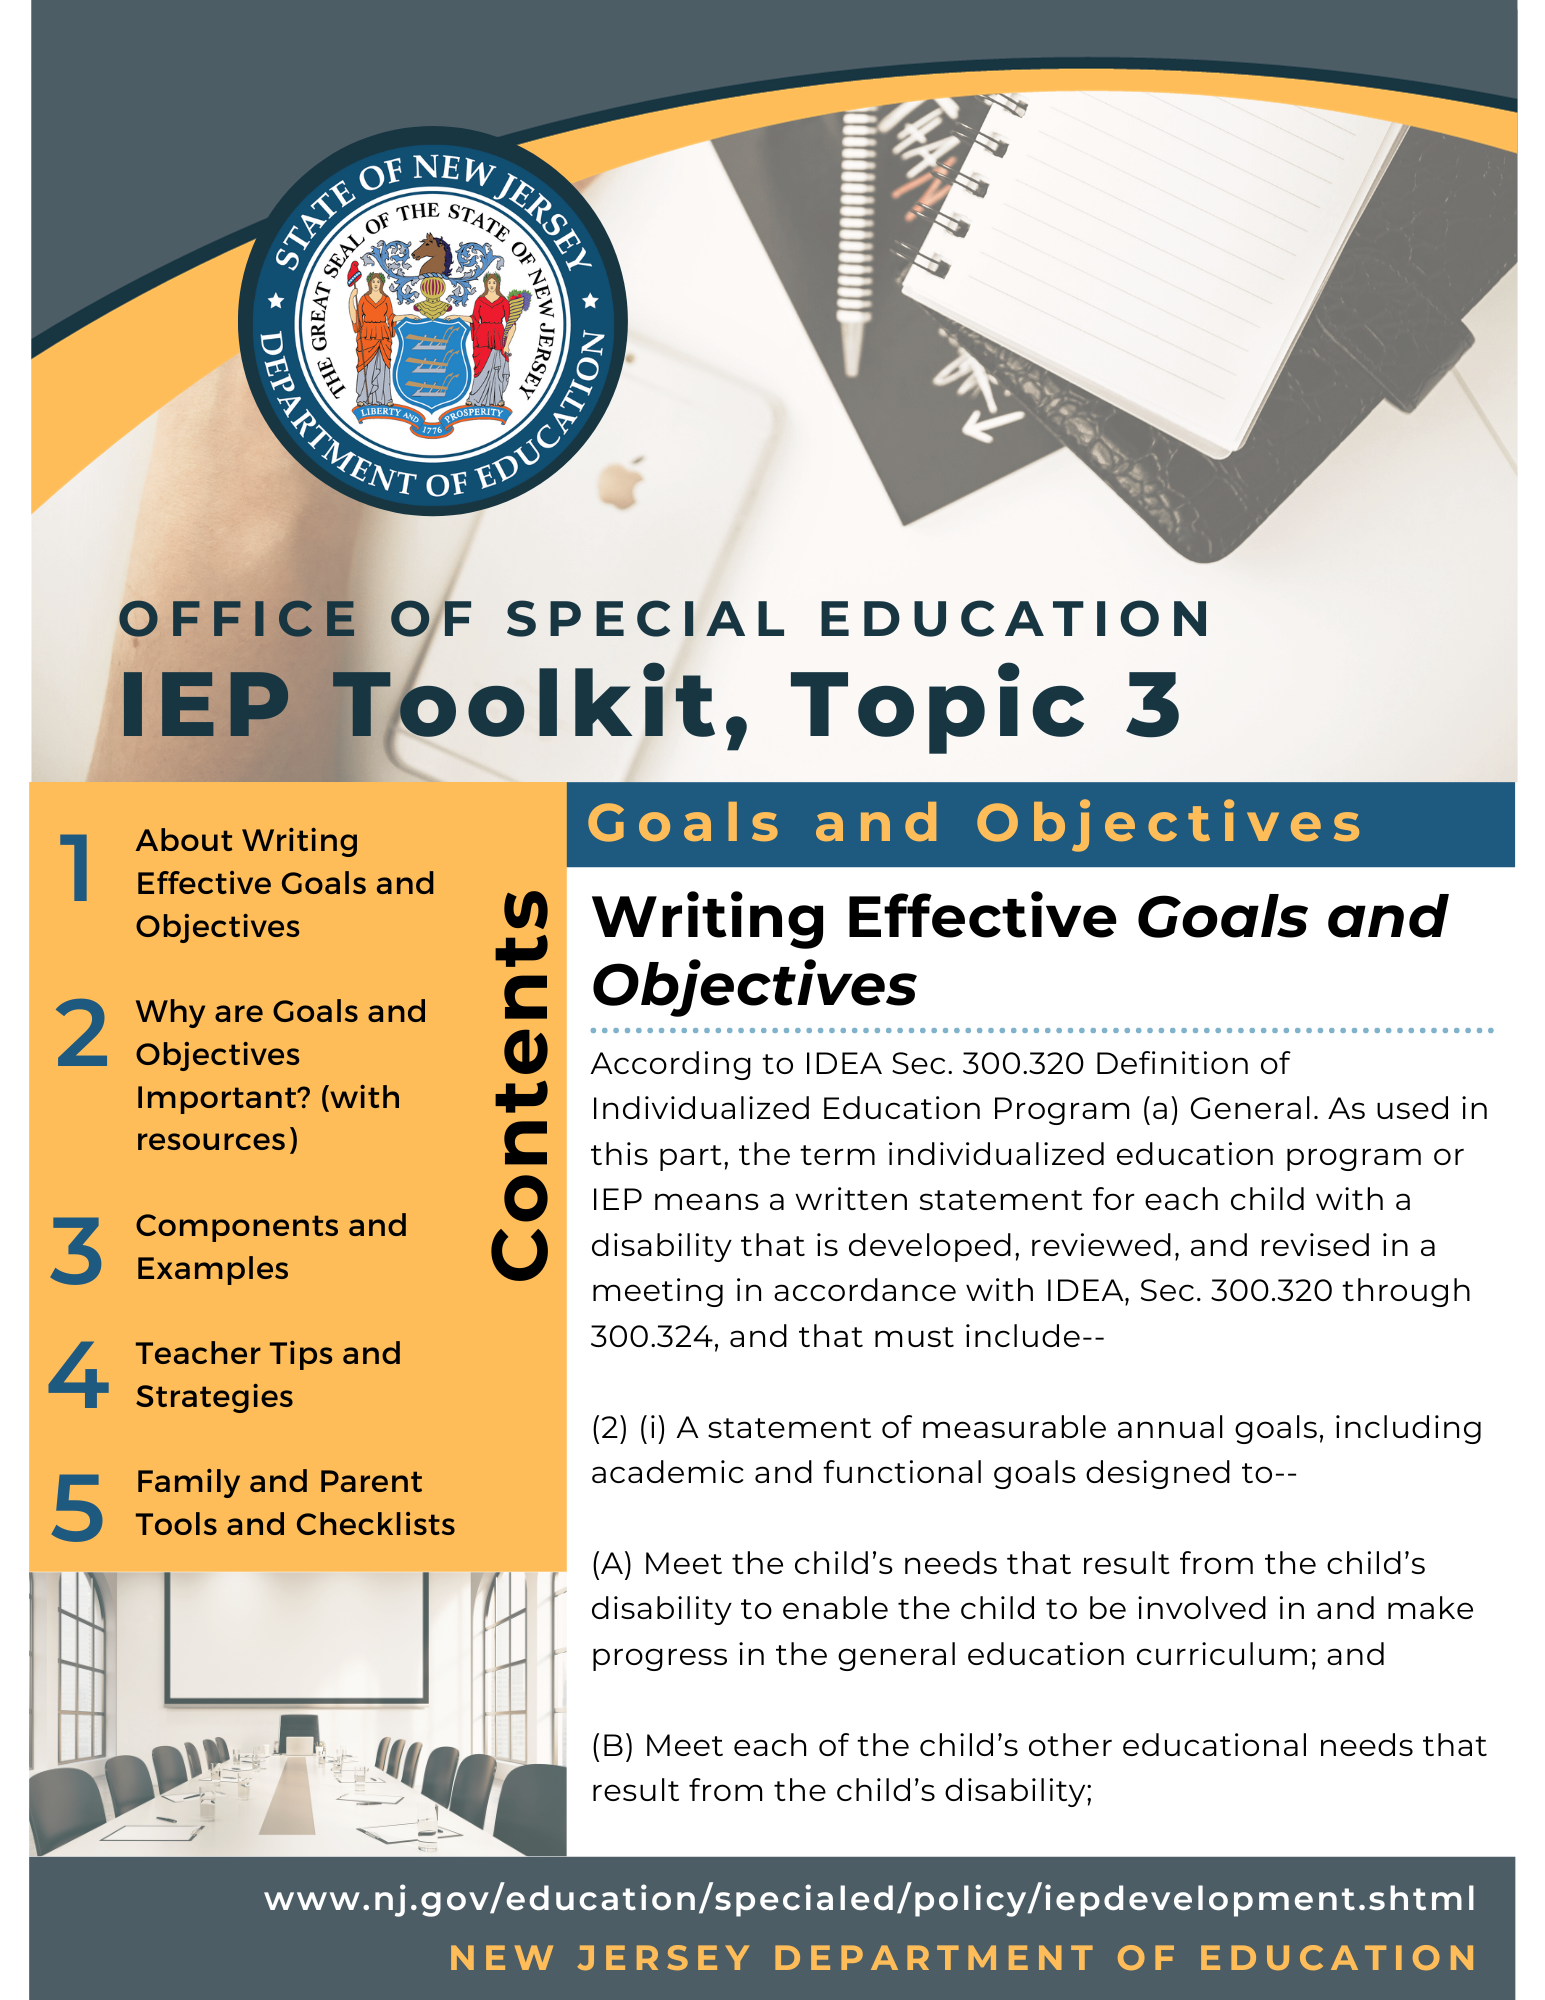 Image showing the title page and front cover of the toolkit that can be seen larger when clicking on the link provided to access the document